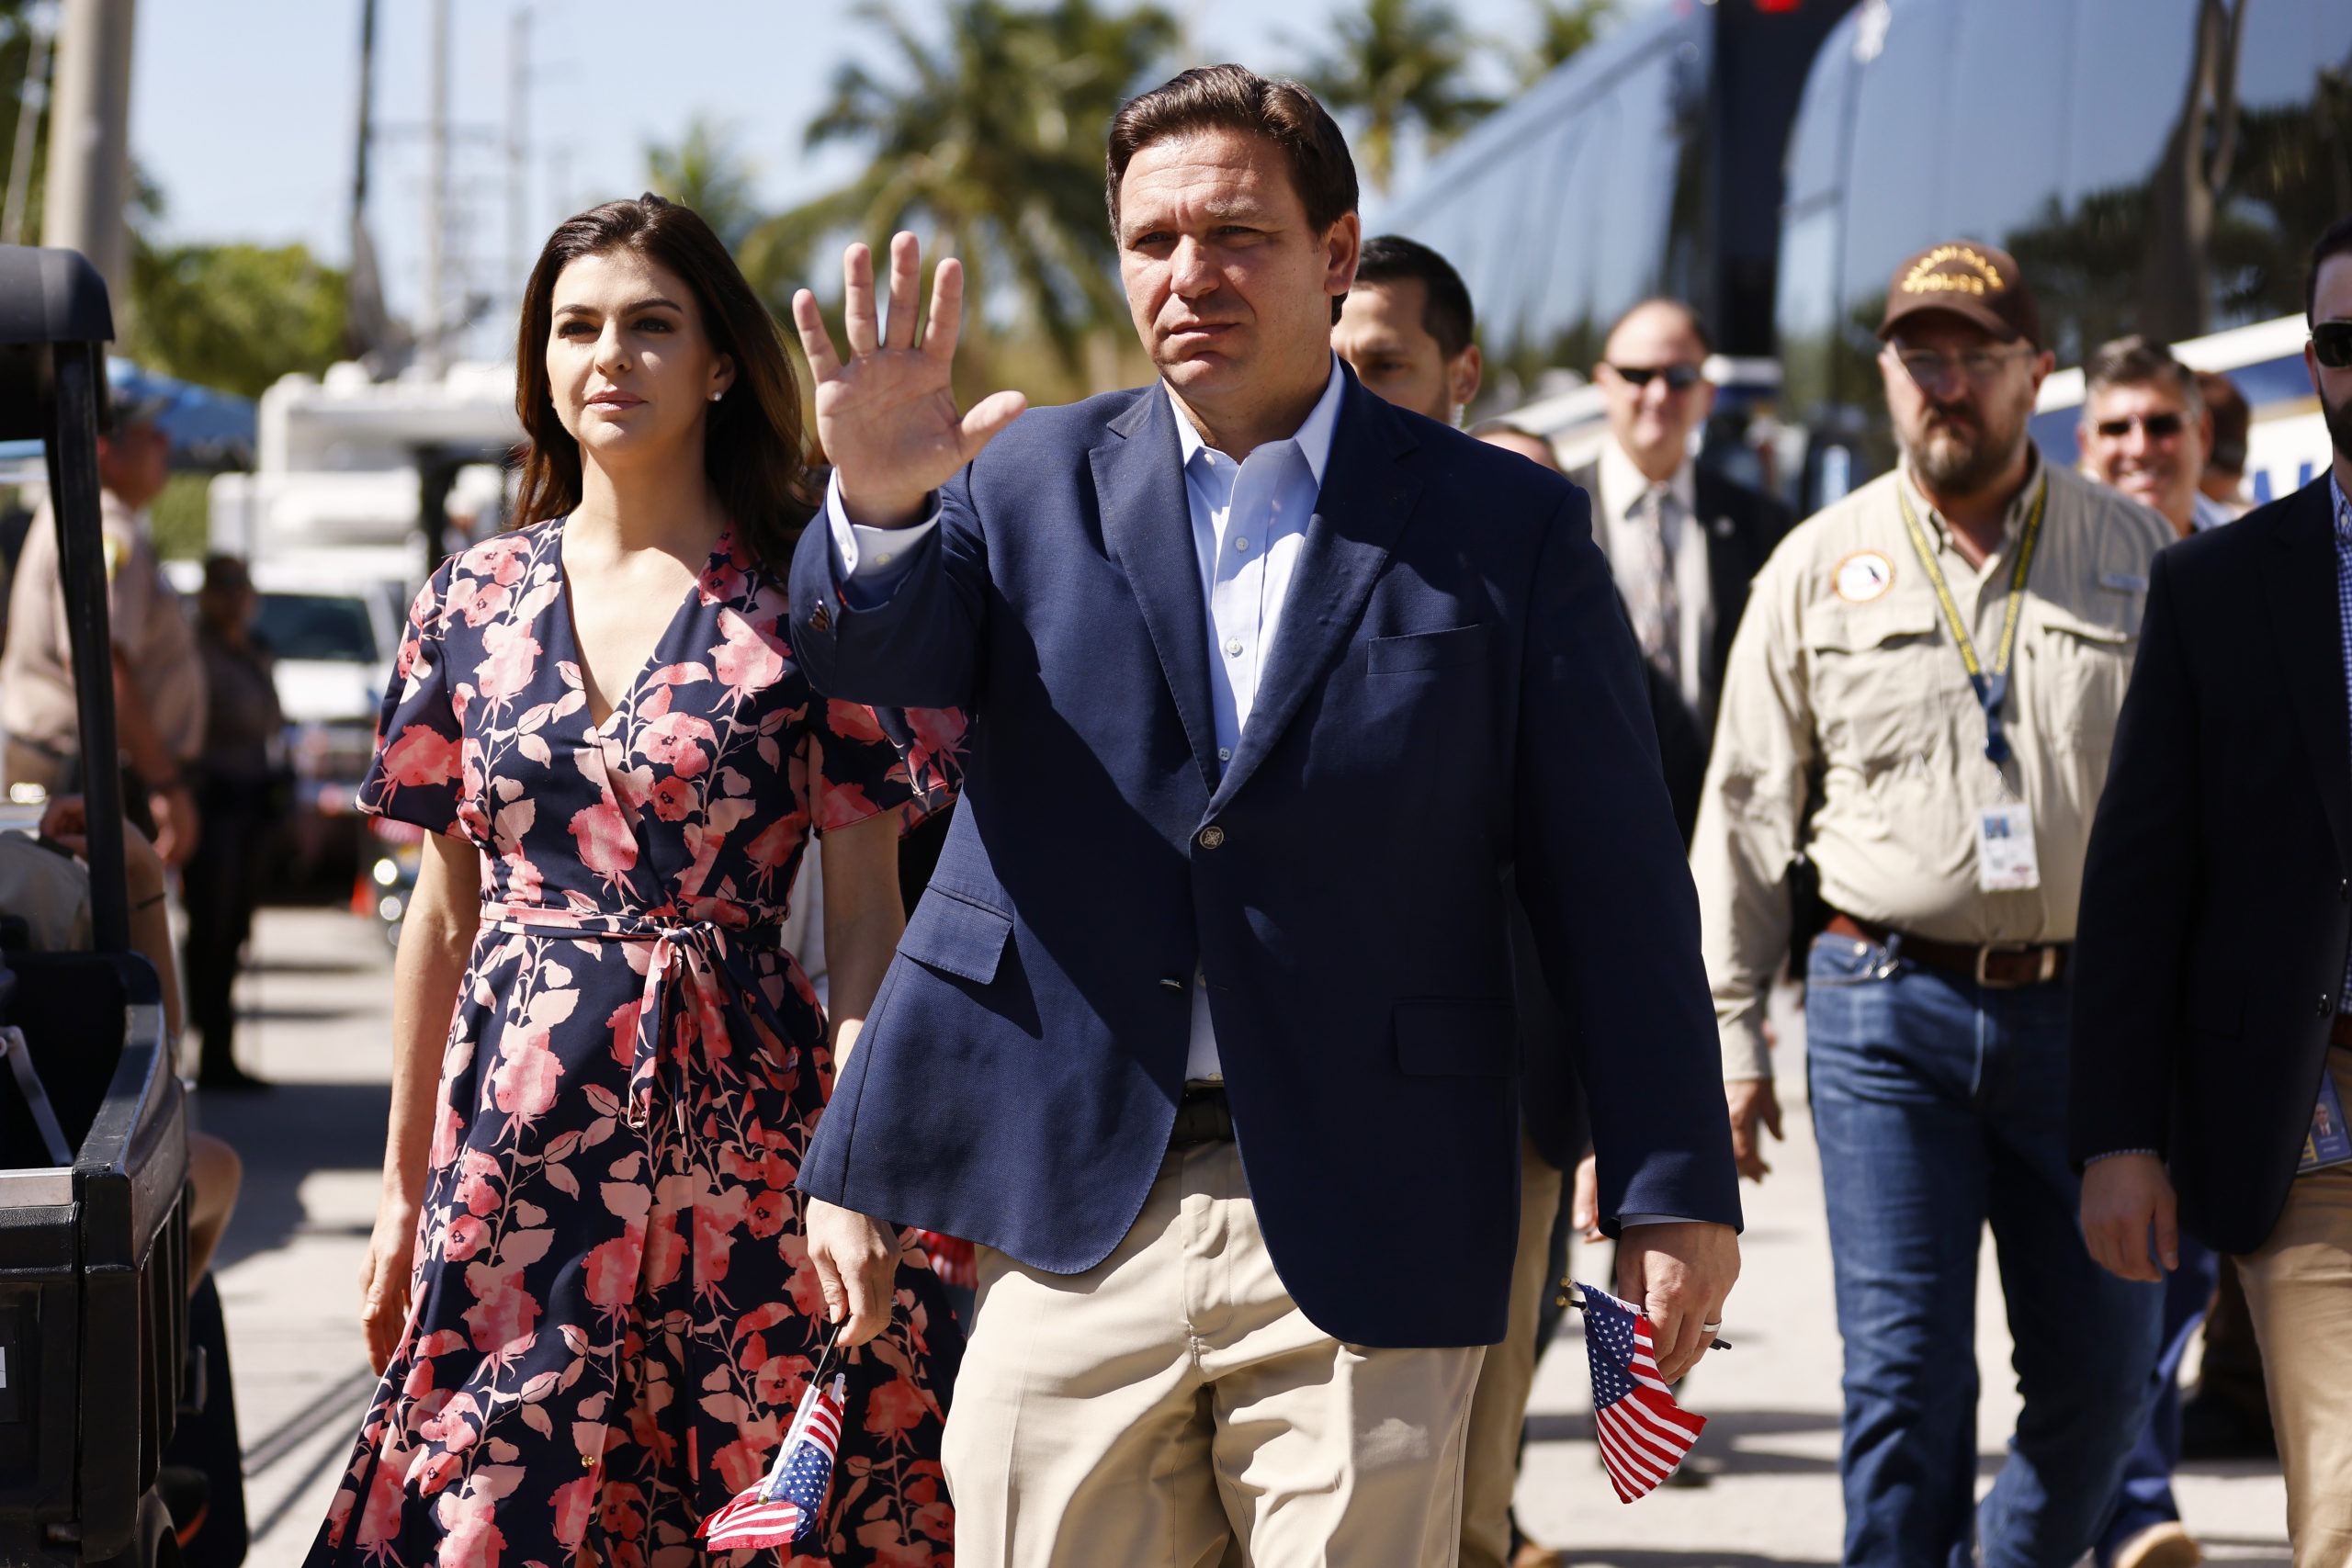 SURFSIDE, FLORIDA - JULY 03: Florida Gov. Ron DeSantis and his wife, Casey, arrive to visit a memorial to those missing outside the 12-story Champlain Towers South condo building that partially collapsed on July 03, 2021 in Surfside, Florida. Over one hundred people are being reported as missing as the search-and-rescue effort continues. (Photo by Michael Reaves/Getty Images)